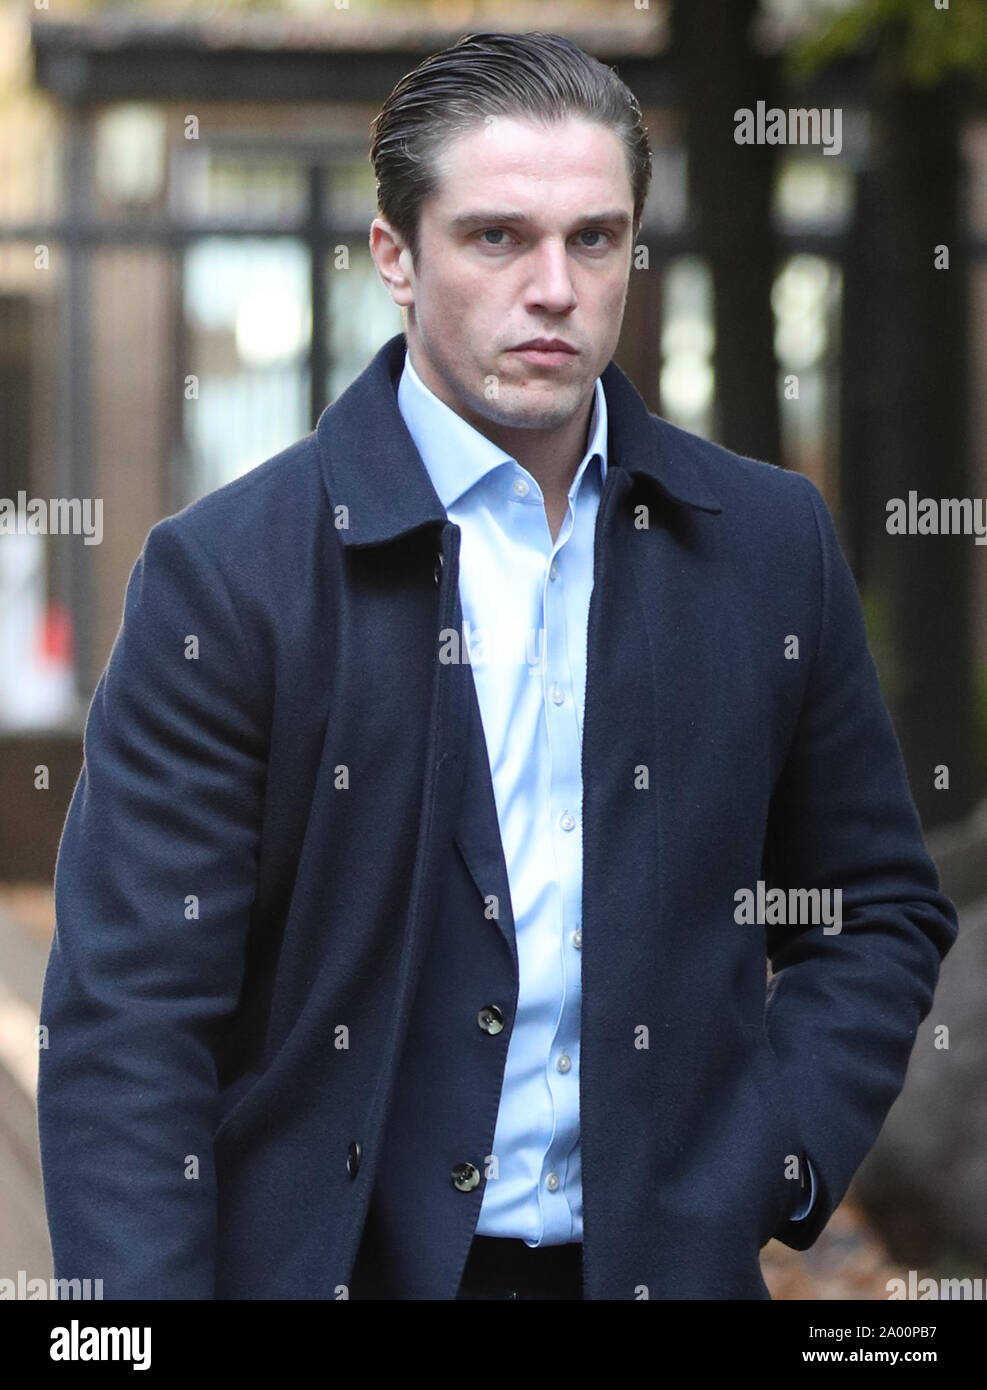 TOWIE star Lewis Bloor arrives at Southwark Crown, London, where he is charged, along with six others, with conspiracy to defraud, involving the marketing and selling of coloured diamonds between May 2013 and June 2014 for investment purposes, knowing the gems to be worthless. Stock Photo